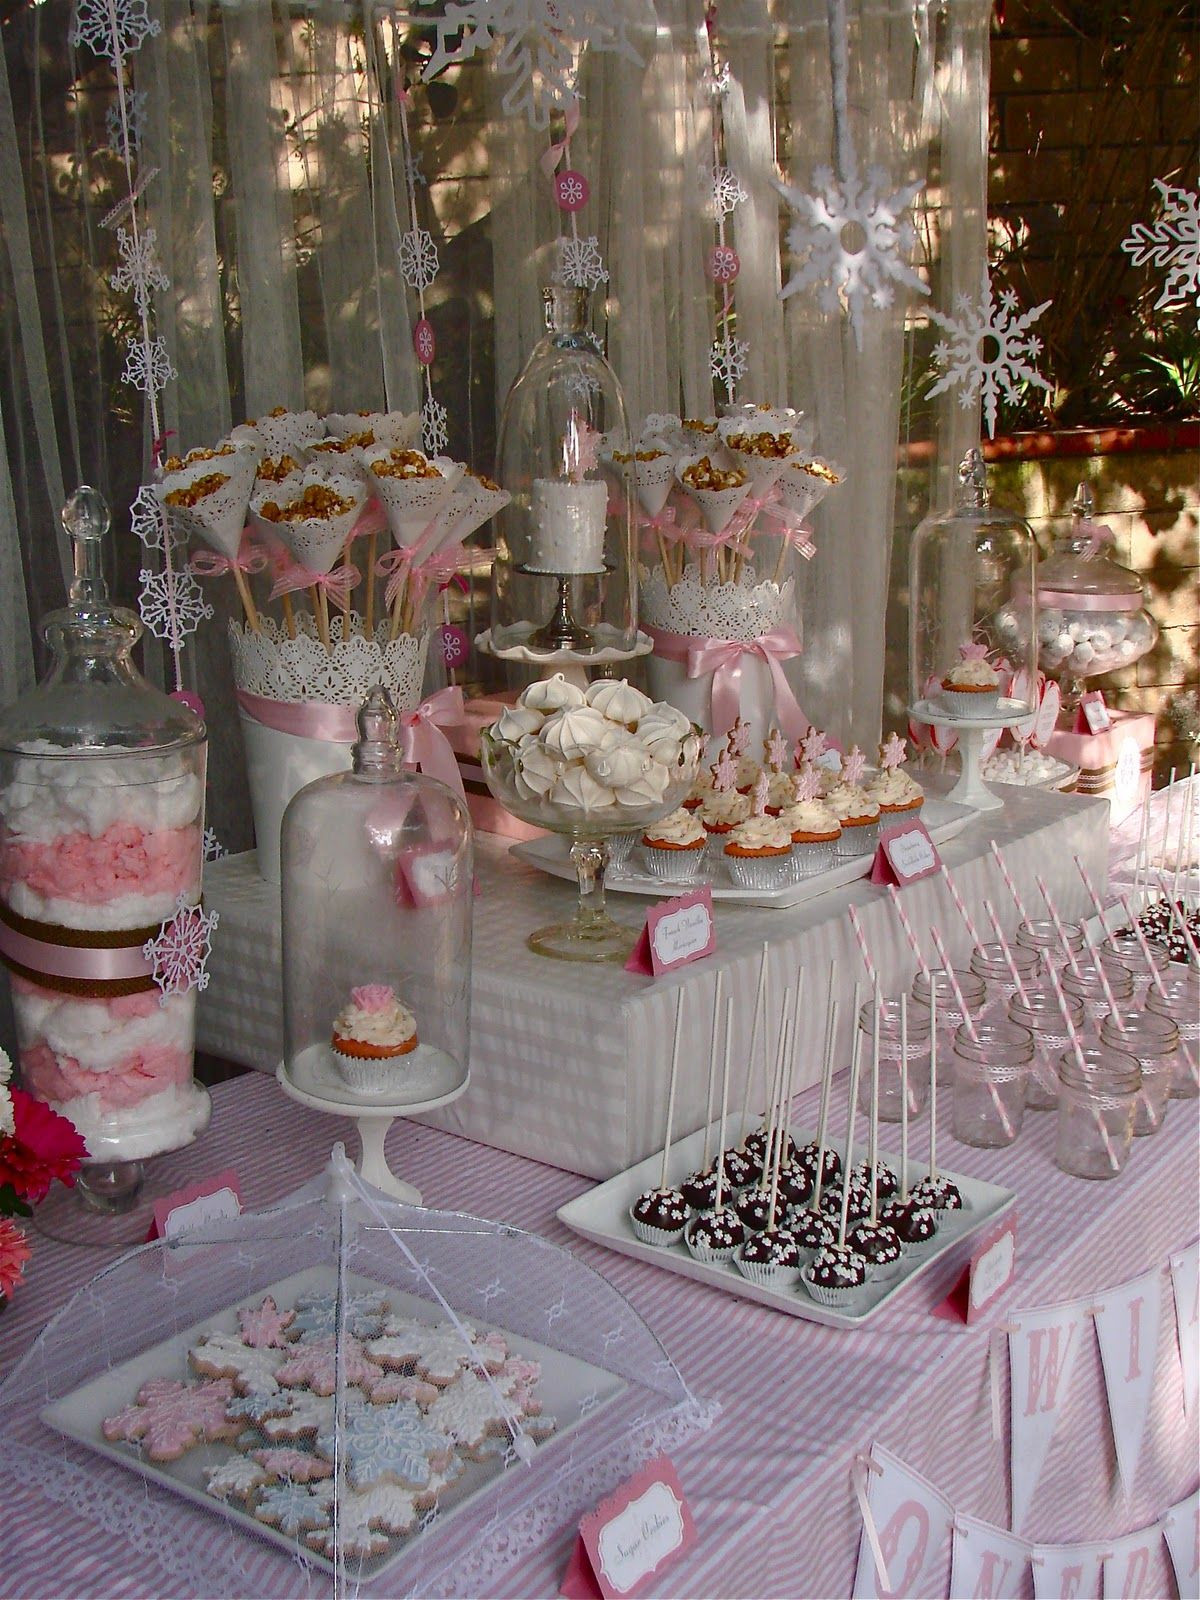 Winter Birthday Party Ideas For 1 Year Old
 I am in love with this pretty in pink Winter e derland